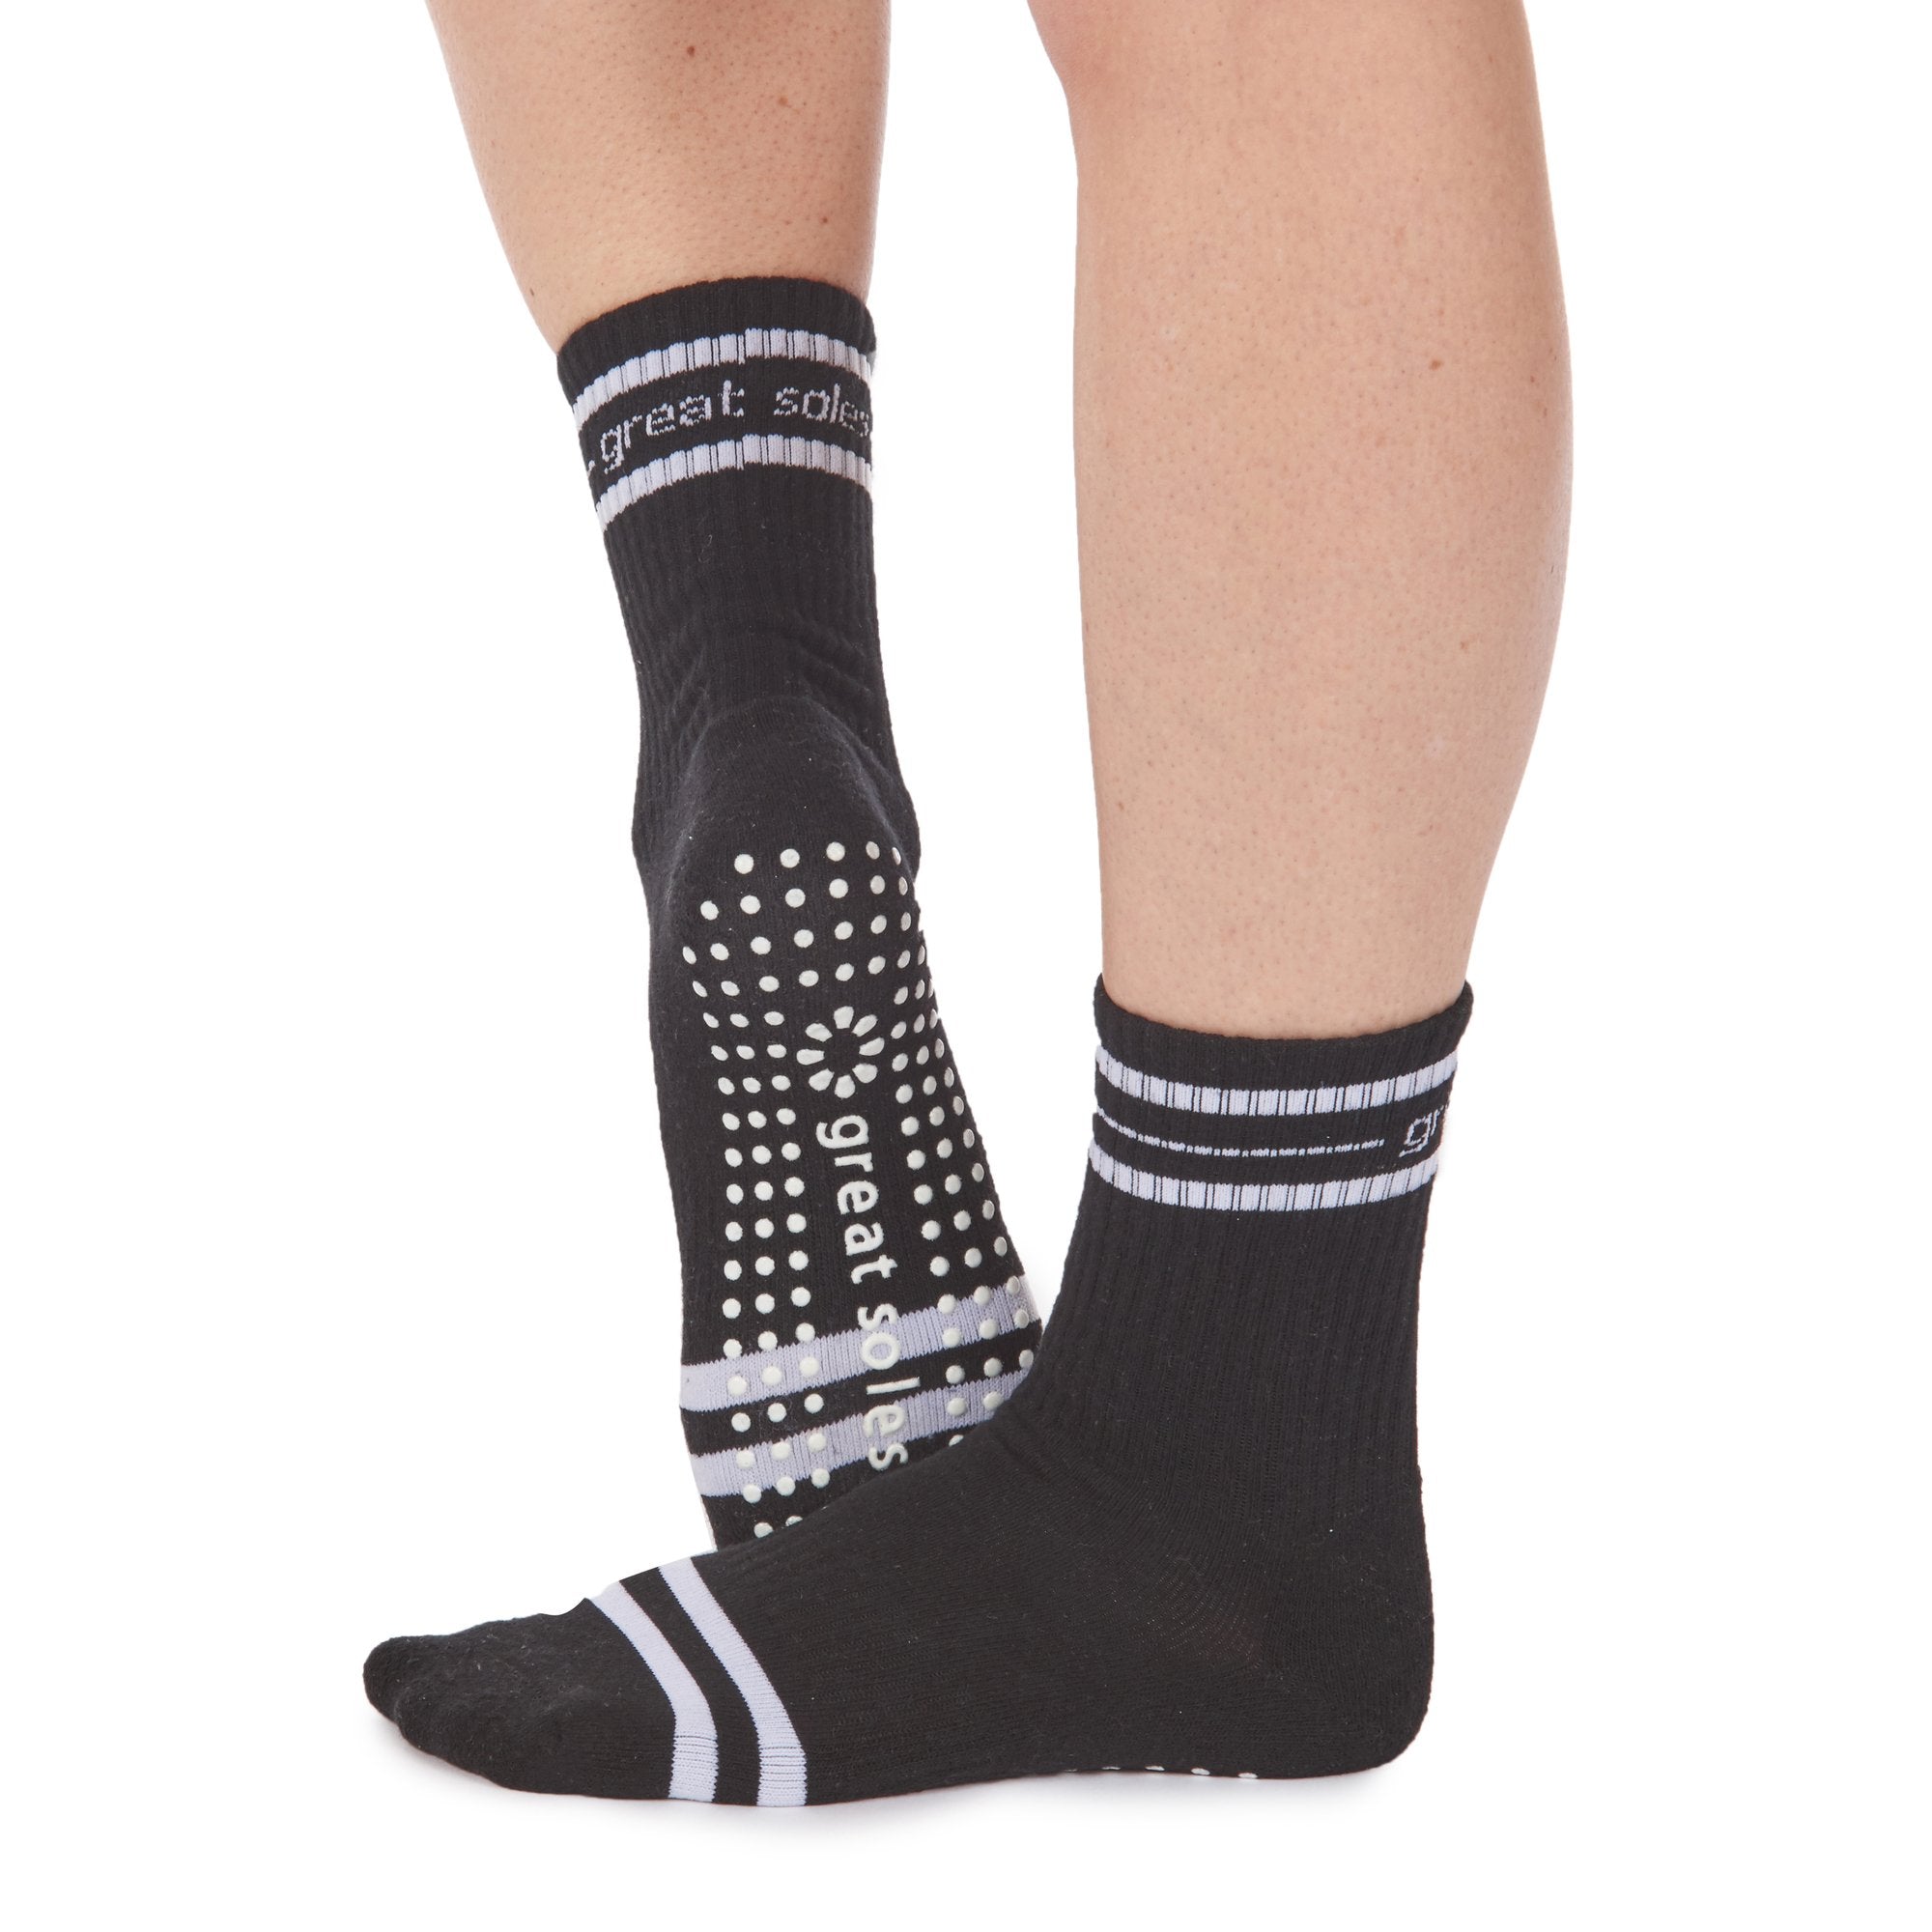 GREAT SOLES - Mia Mesh Grip Socks - Green on SimplyWORKOUT